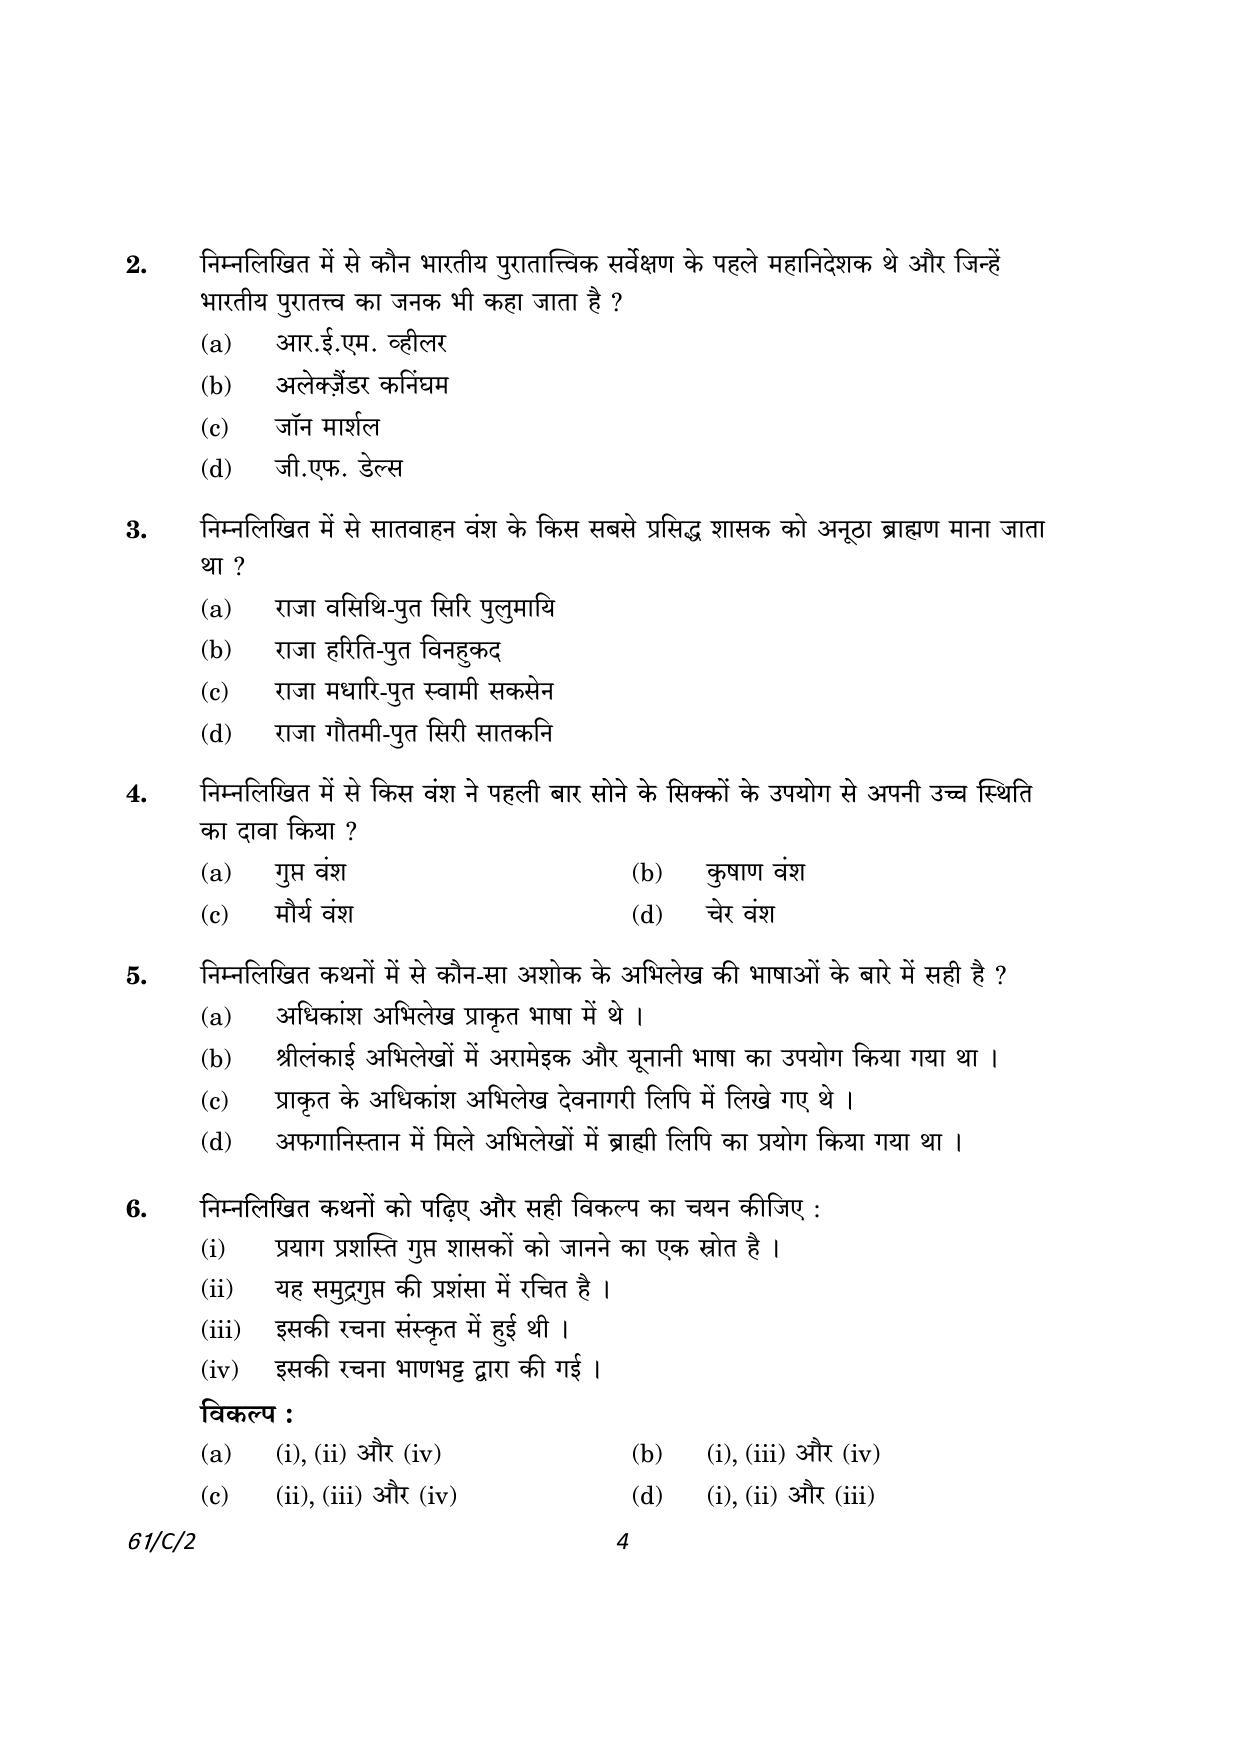 CBSE Class 12 61-2 History 2023 (Compartment) Question Paper - Page 4